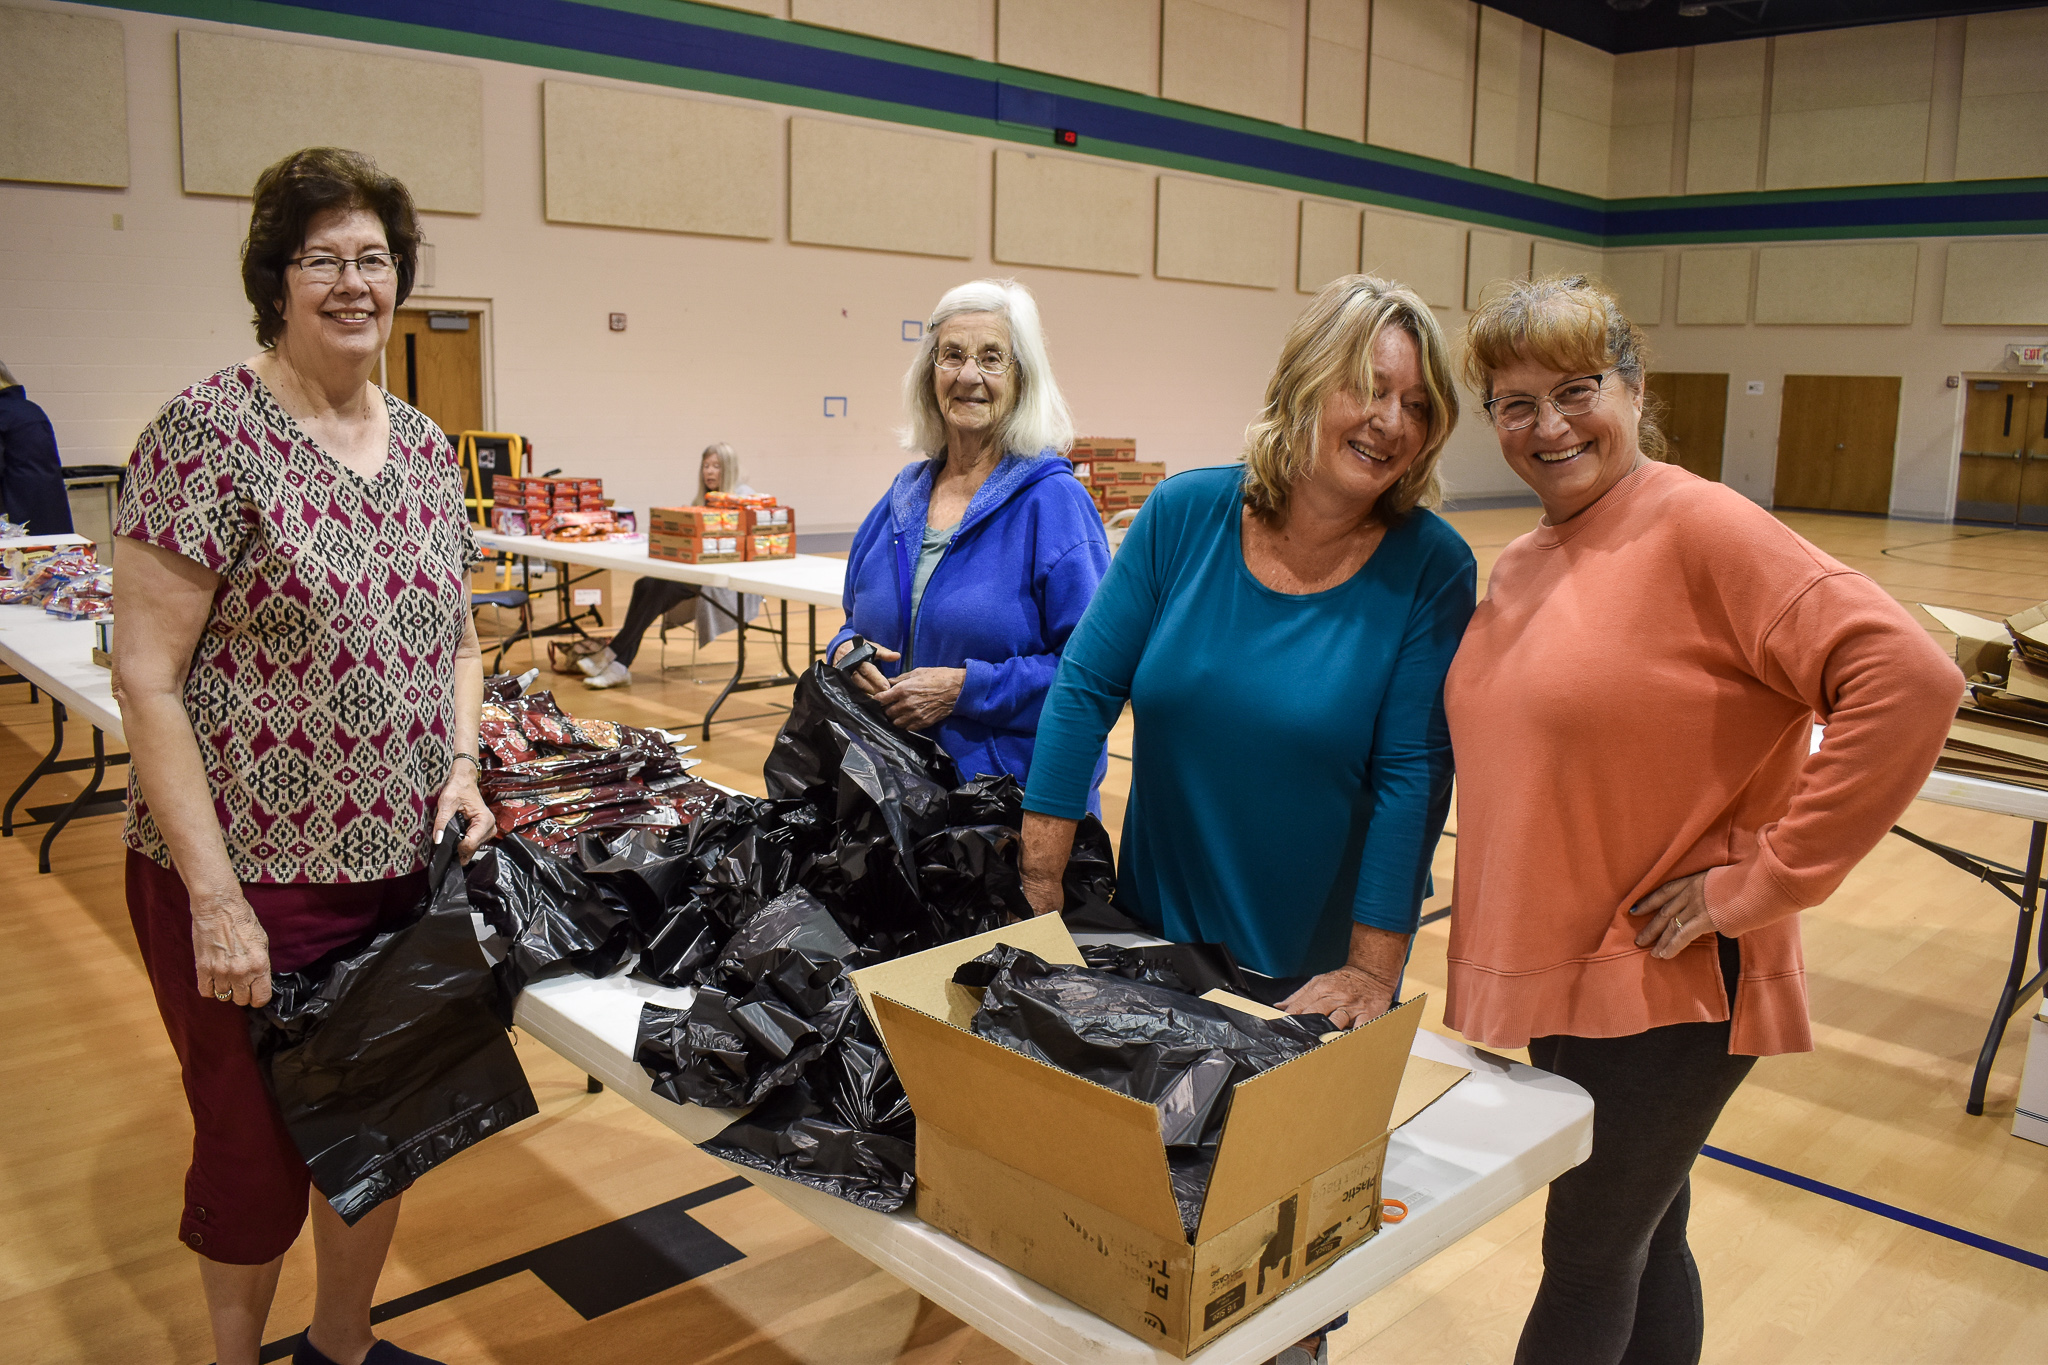 Four volunteers stand in a gym, posing as they fill bags with food